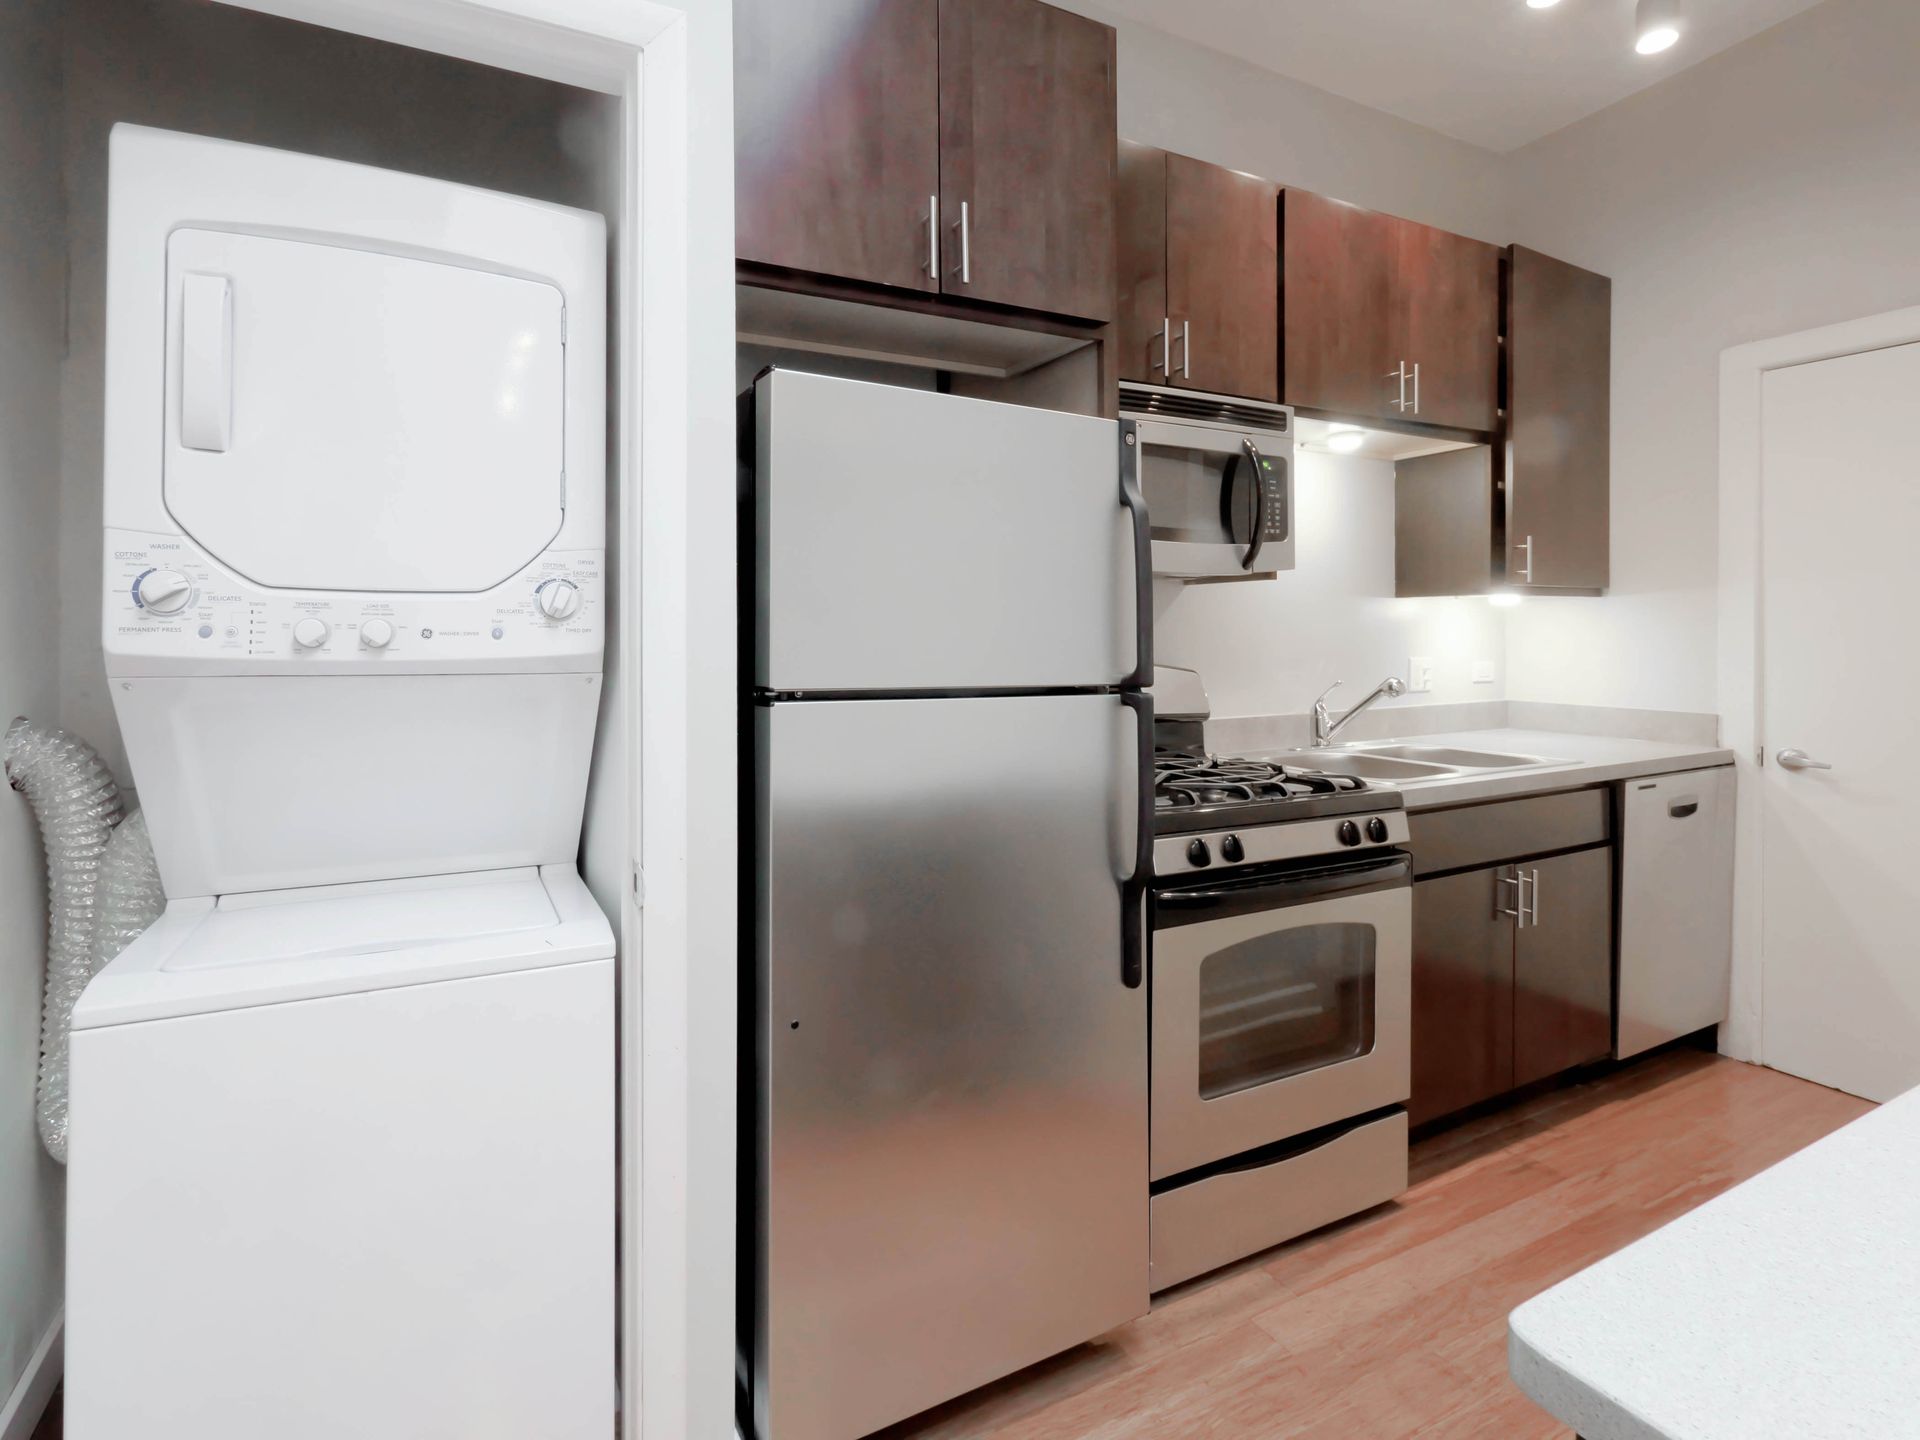 Reside on Clark kitchen and laundry machines